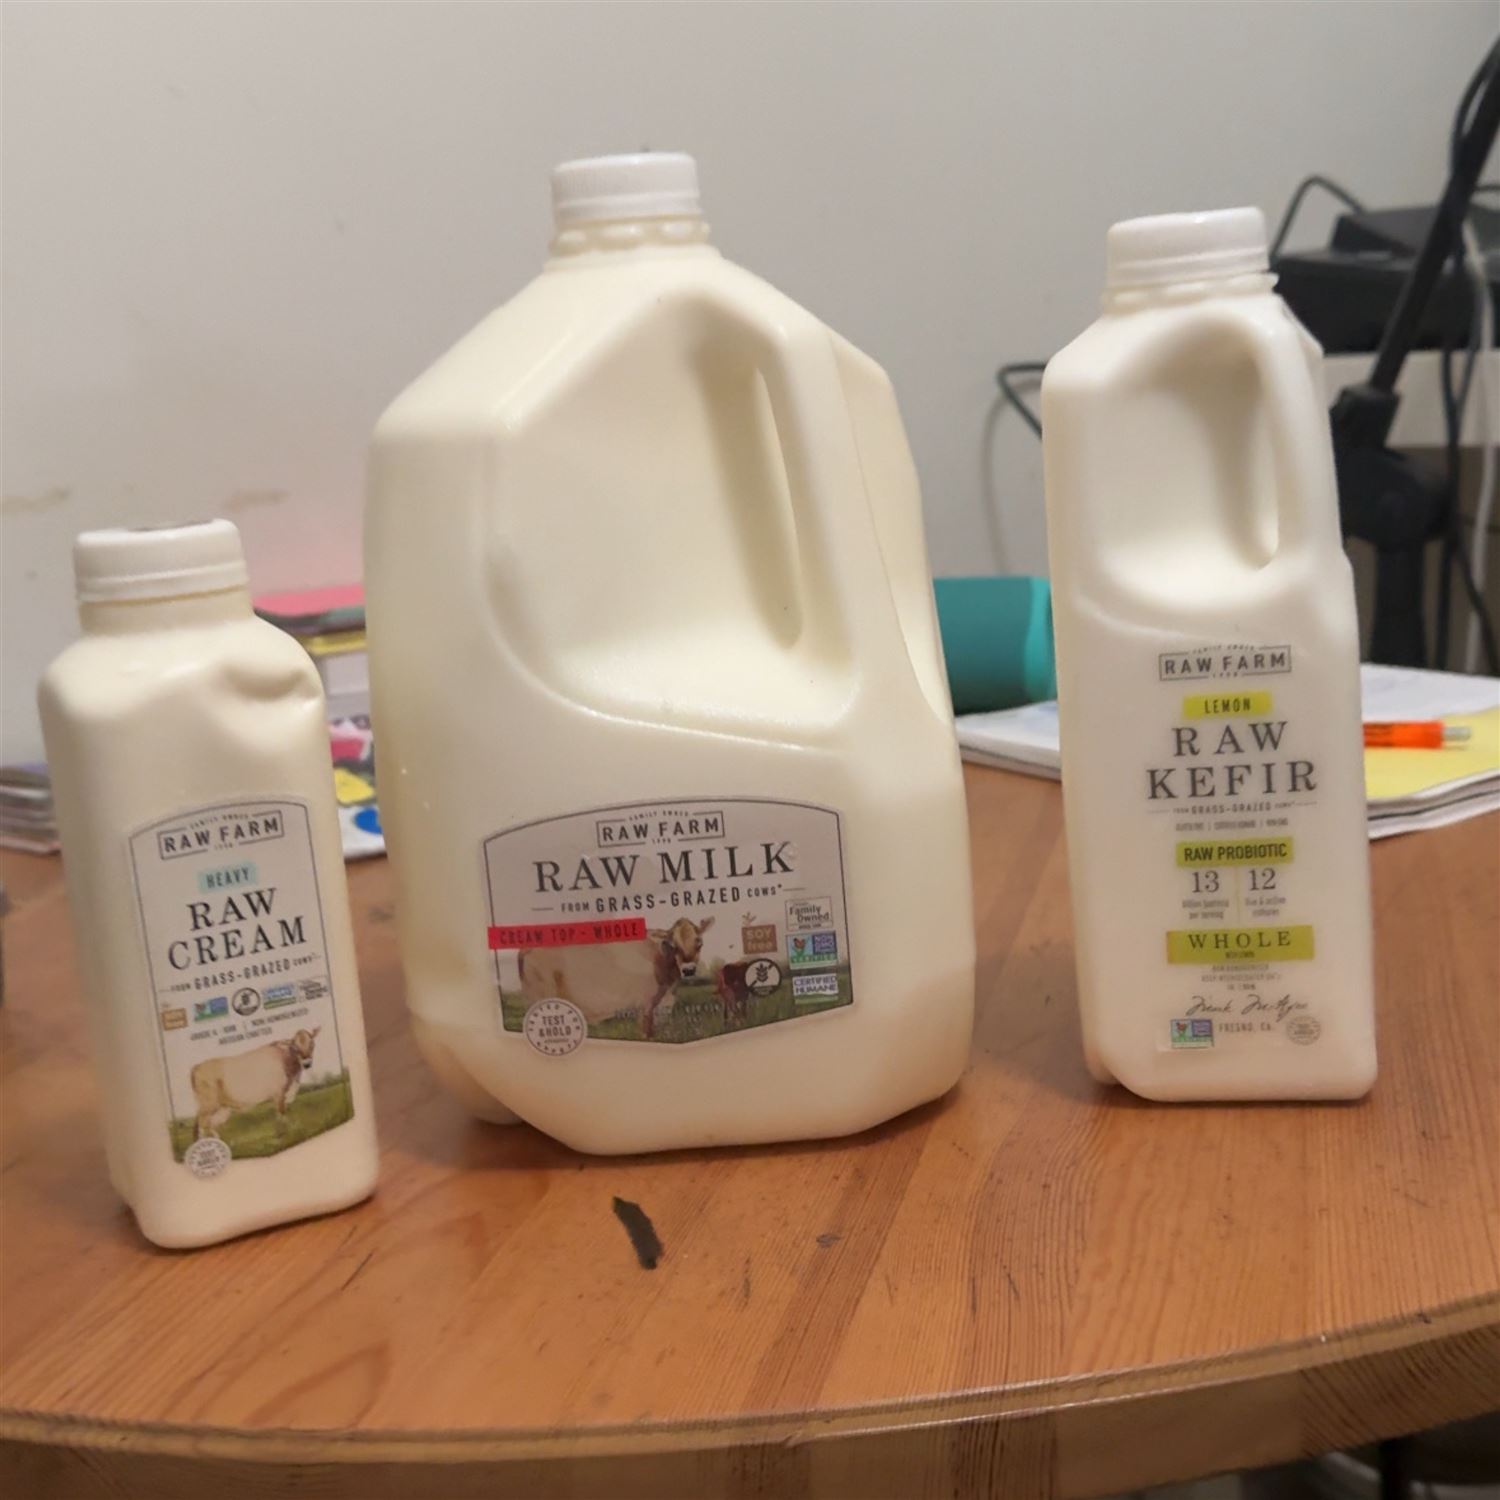 Raw Milk News and Stories - Science in link